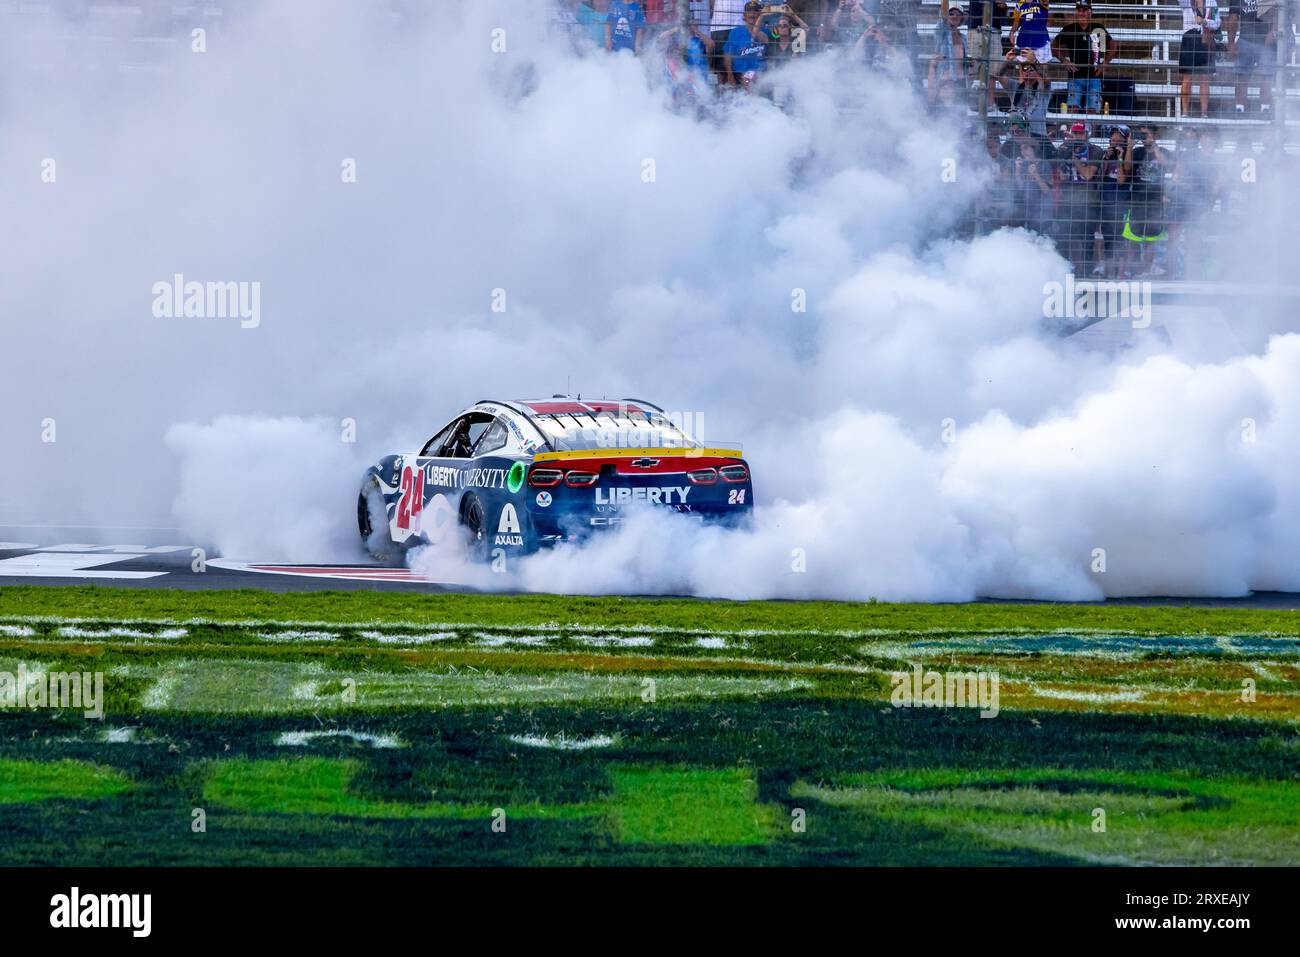 Fort Worth, Texas - September 24rd, 2023: William Byron, driver of the #24 Liberty University Chevrolet, after winning the NASCAR Autotrader EchoPark Automotive 400 at Texas Motor Speedway. Credit: Nick Paruch/Alamy Live News Stock Photo